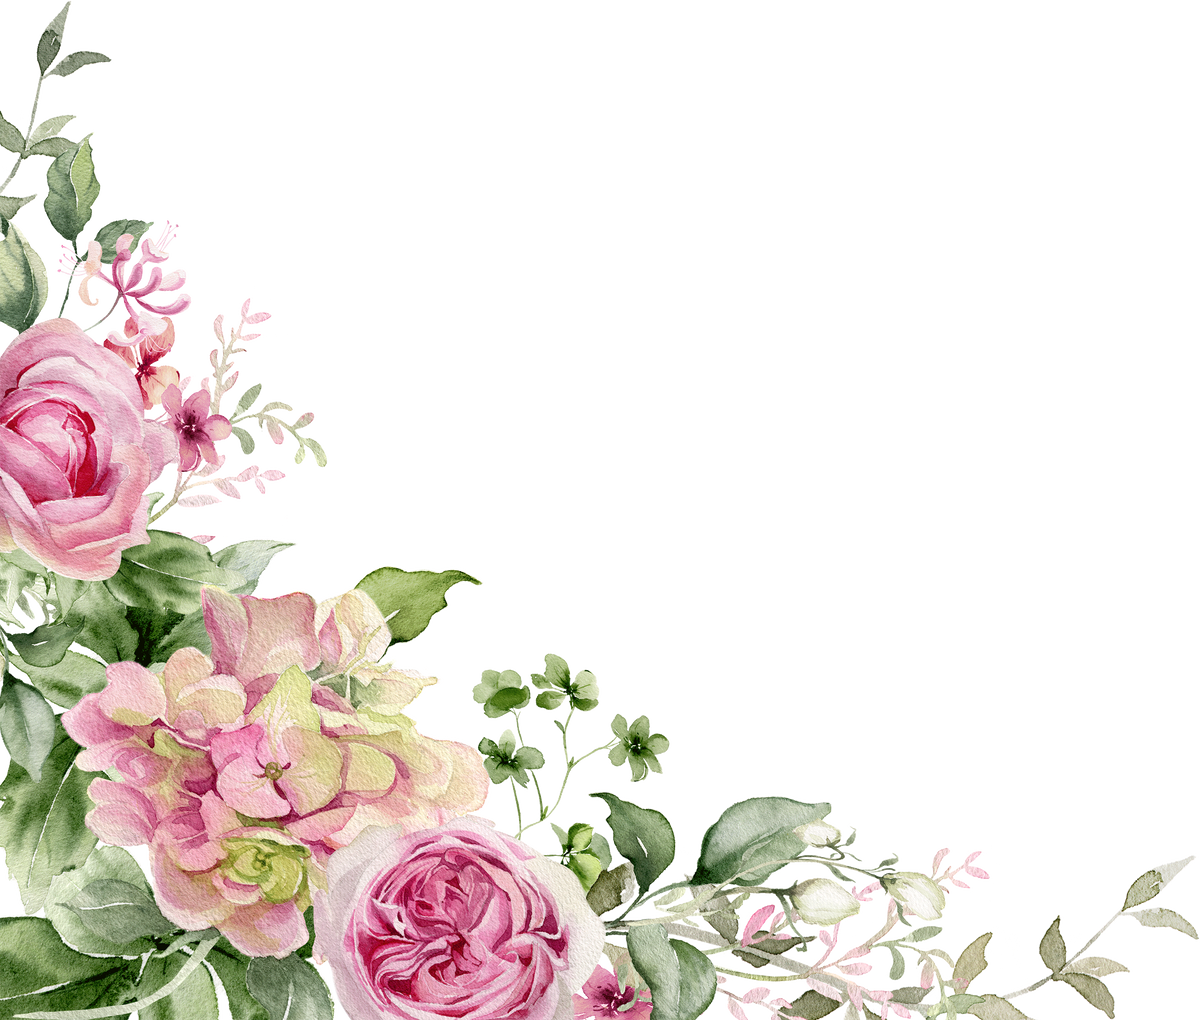 Watercolor flowers corner border. Pink peony, rose floral background